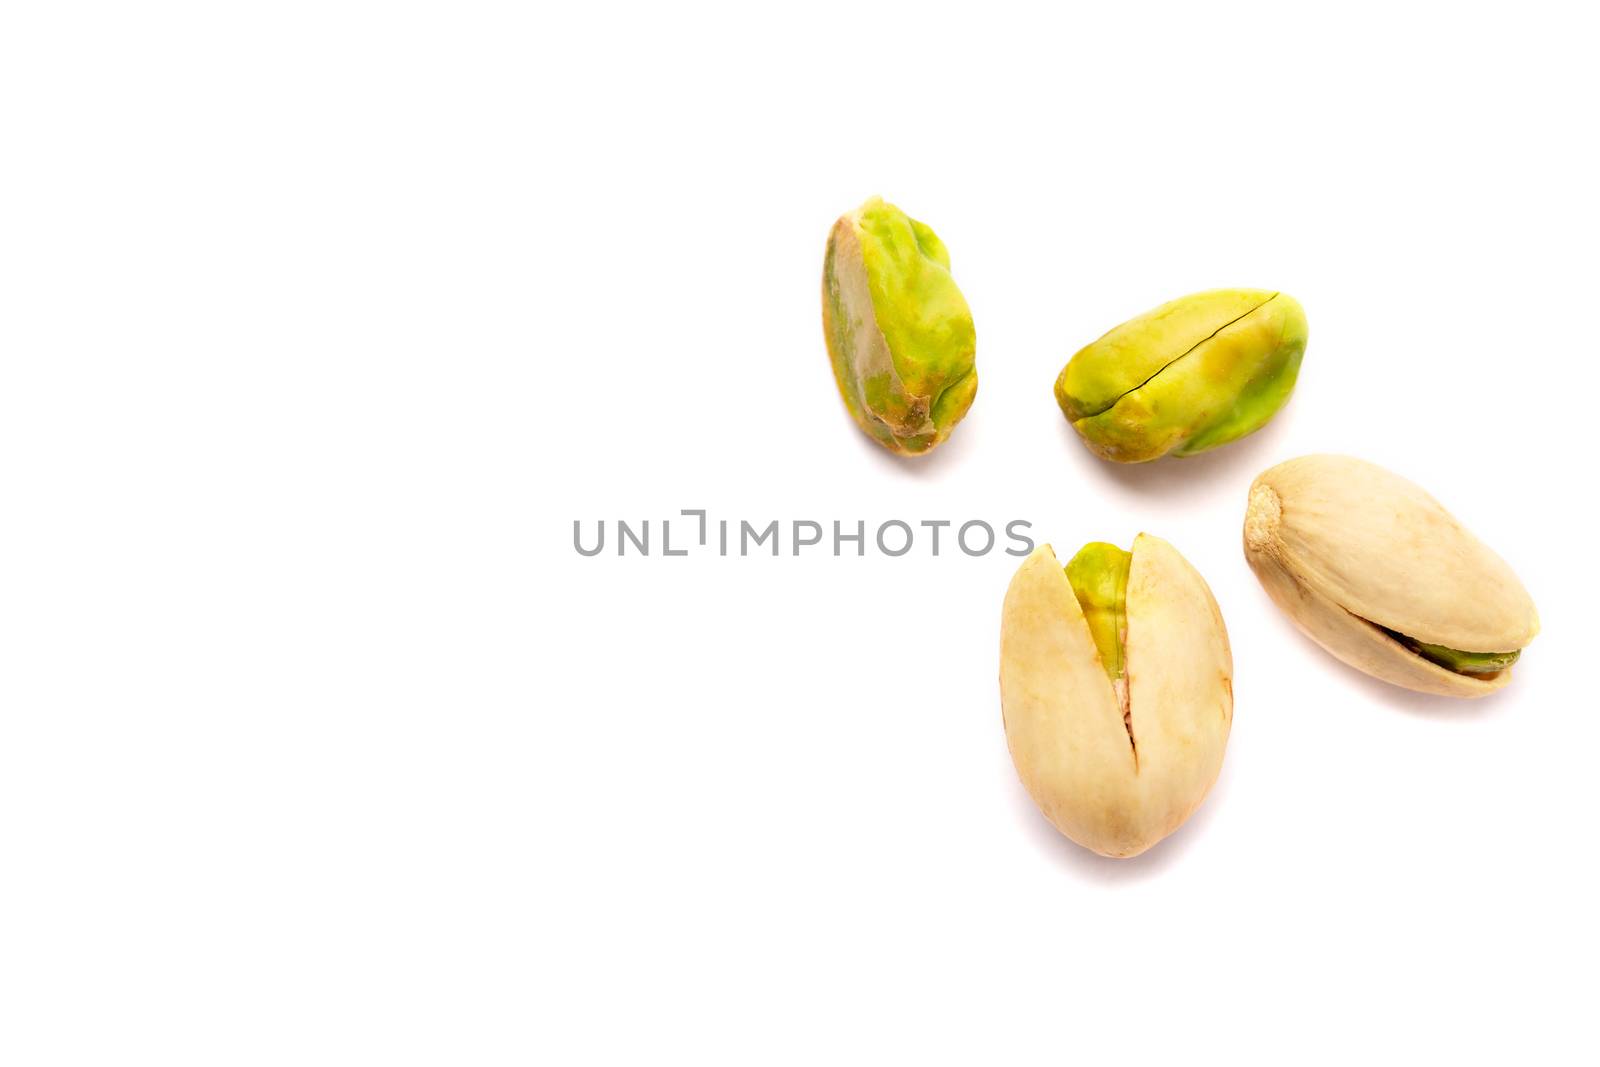 Some Pistachio nuts on a white background